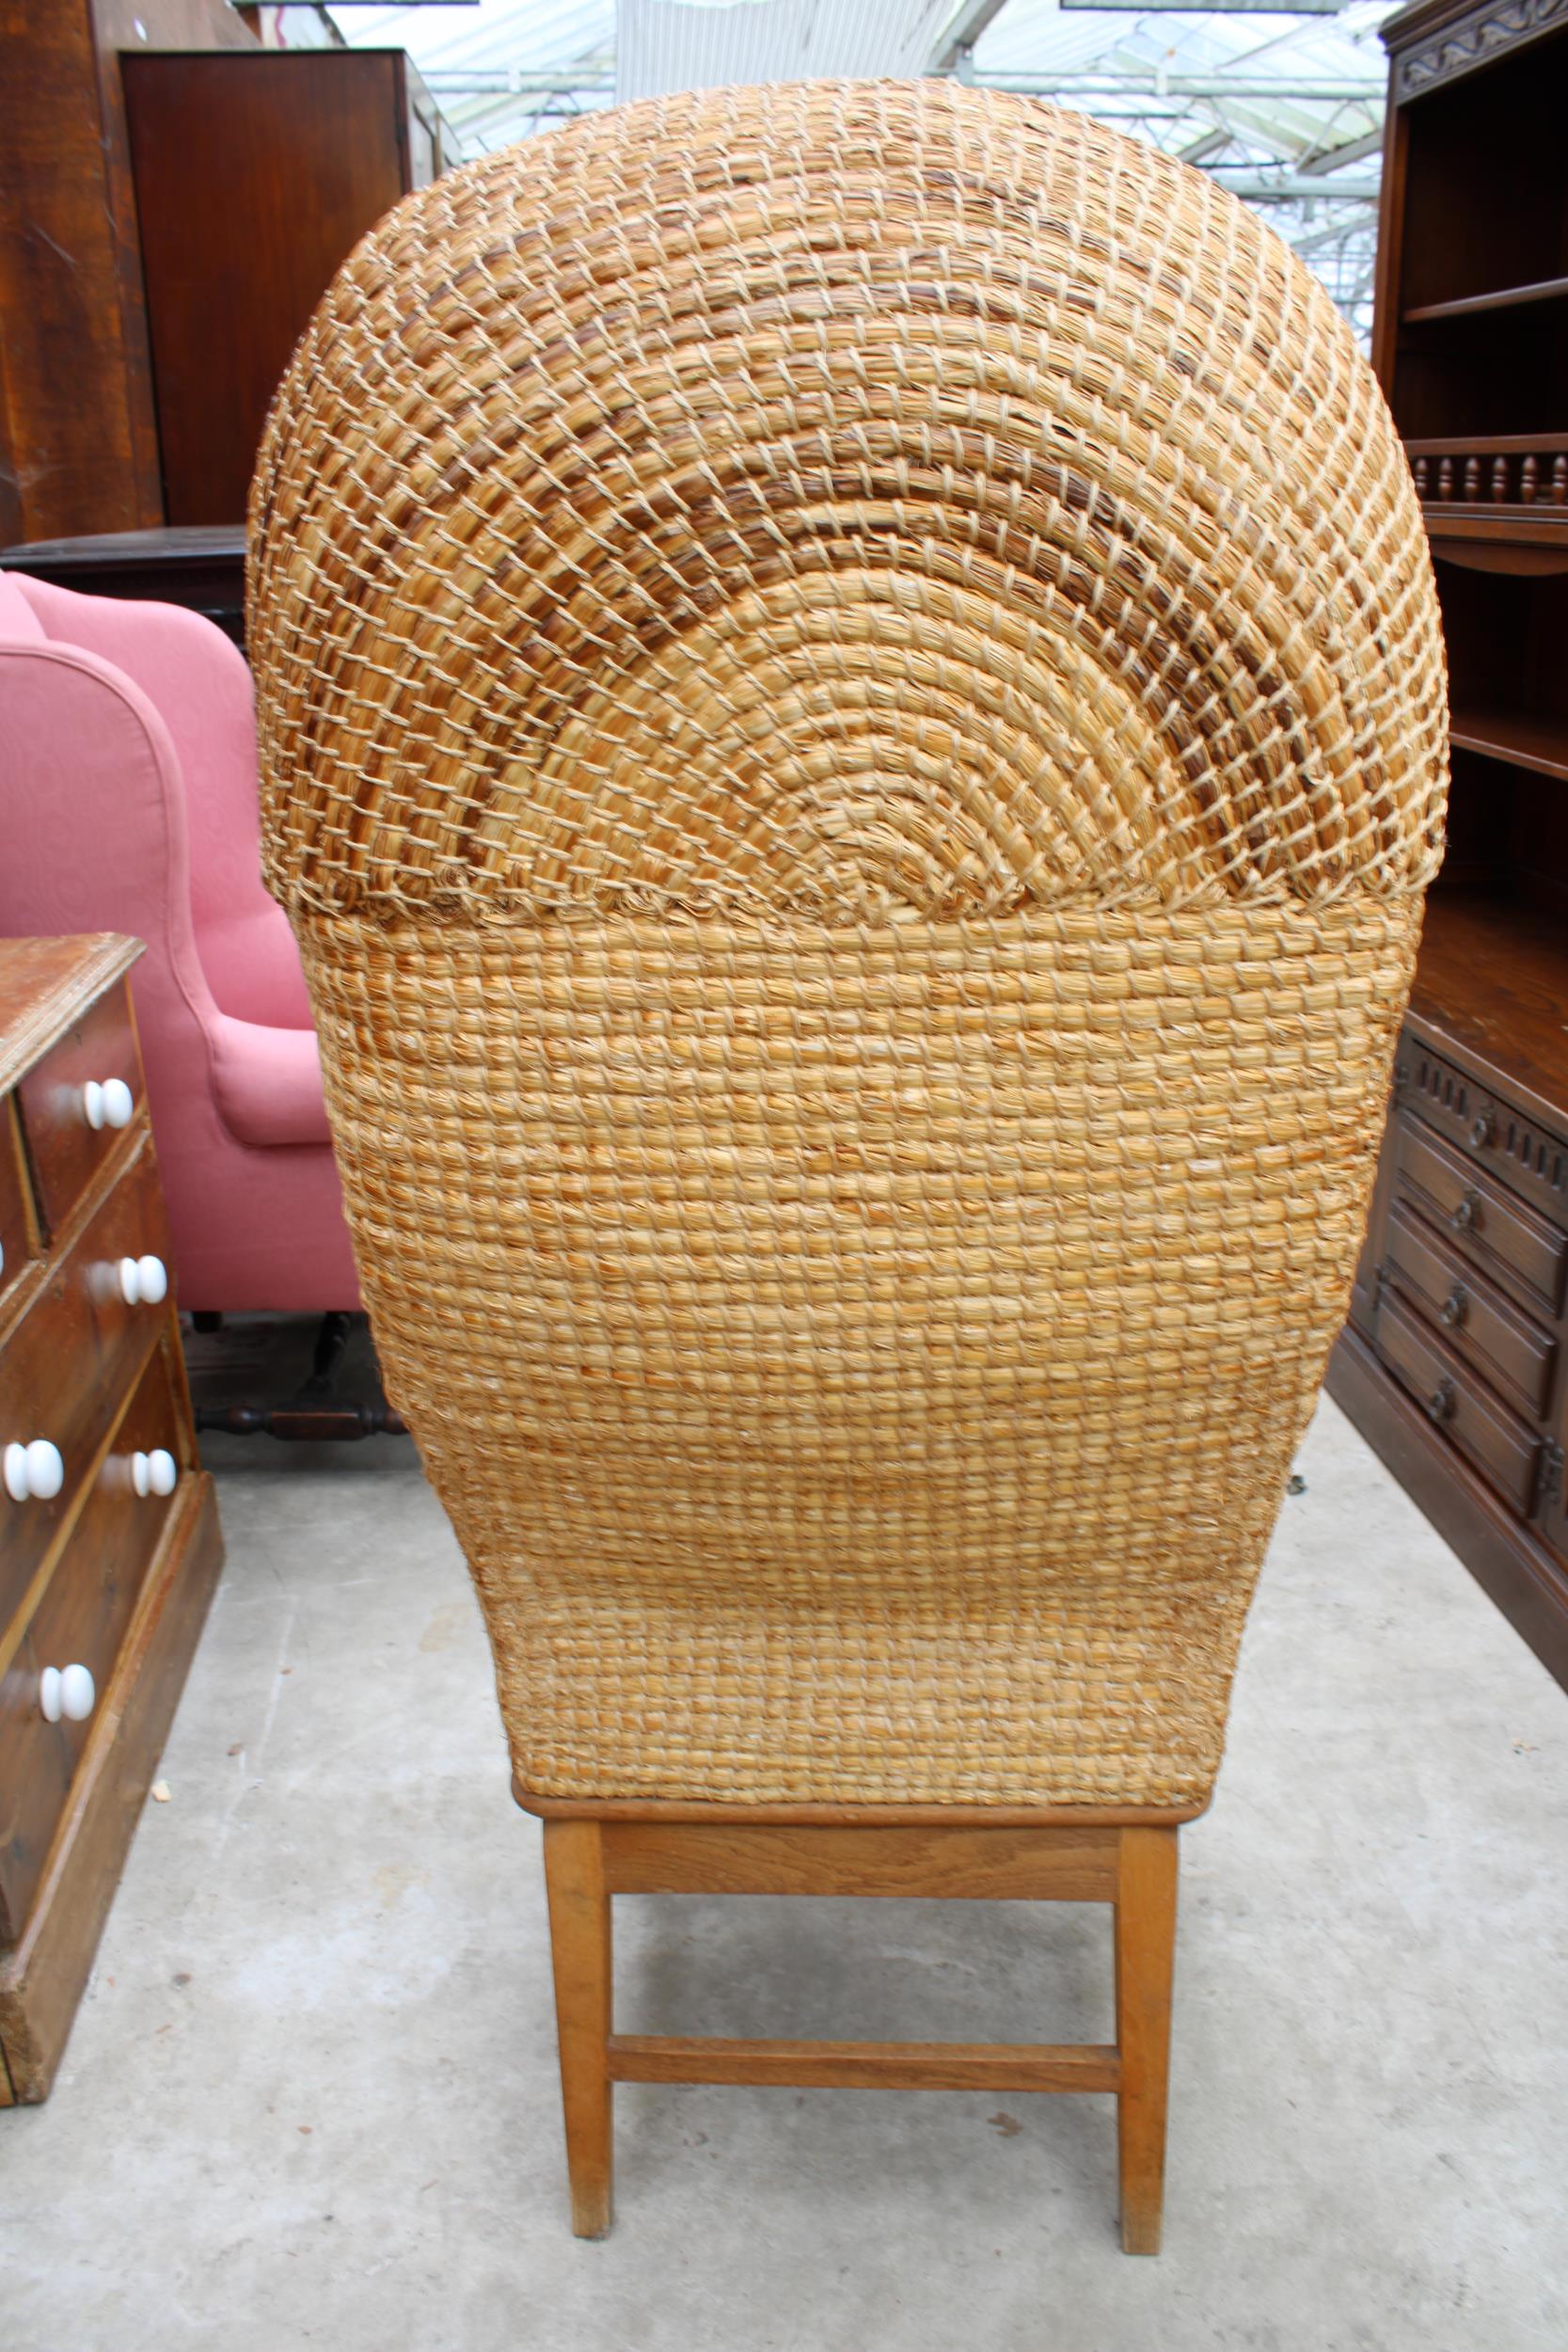 A HOODED OAK FRAMED ORKNEY CHAIR WITH WICKER SEAT AND STITCHED STRAW BACK, STAMPED D M KIRKNESS, - Image 3 of 4